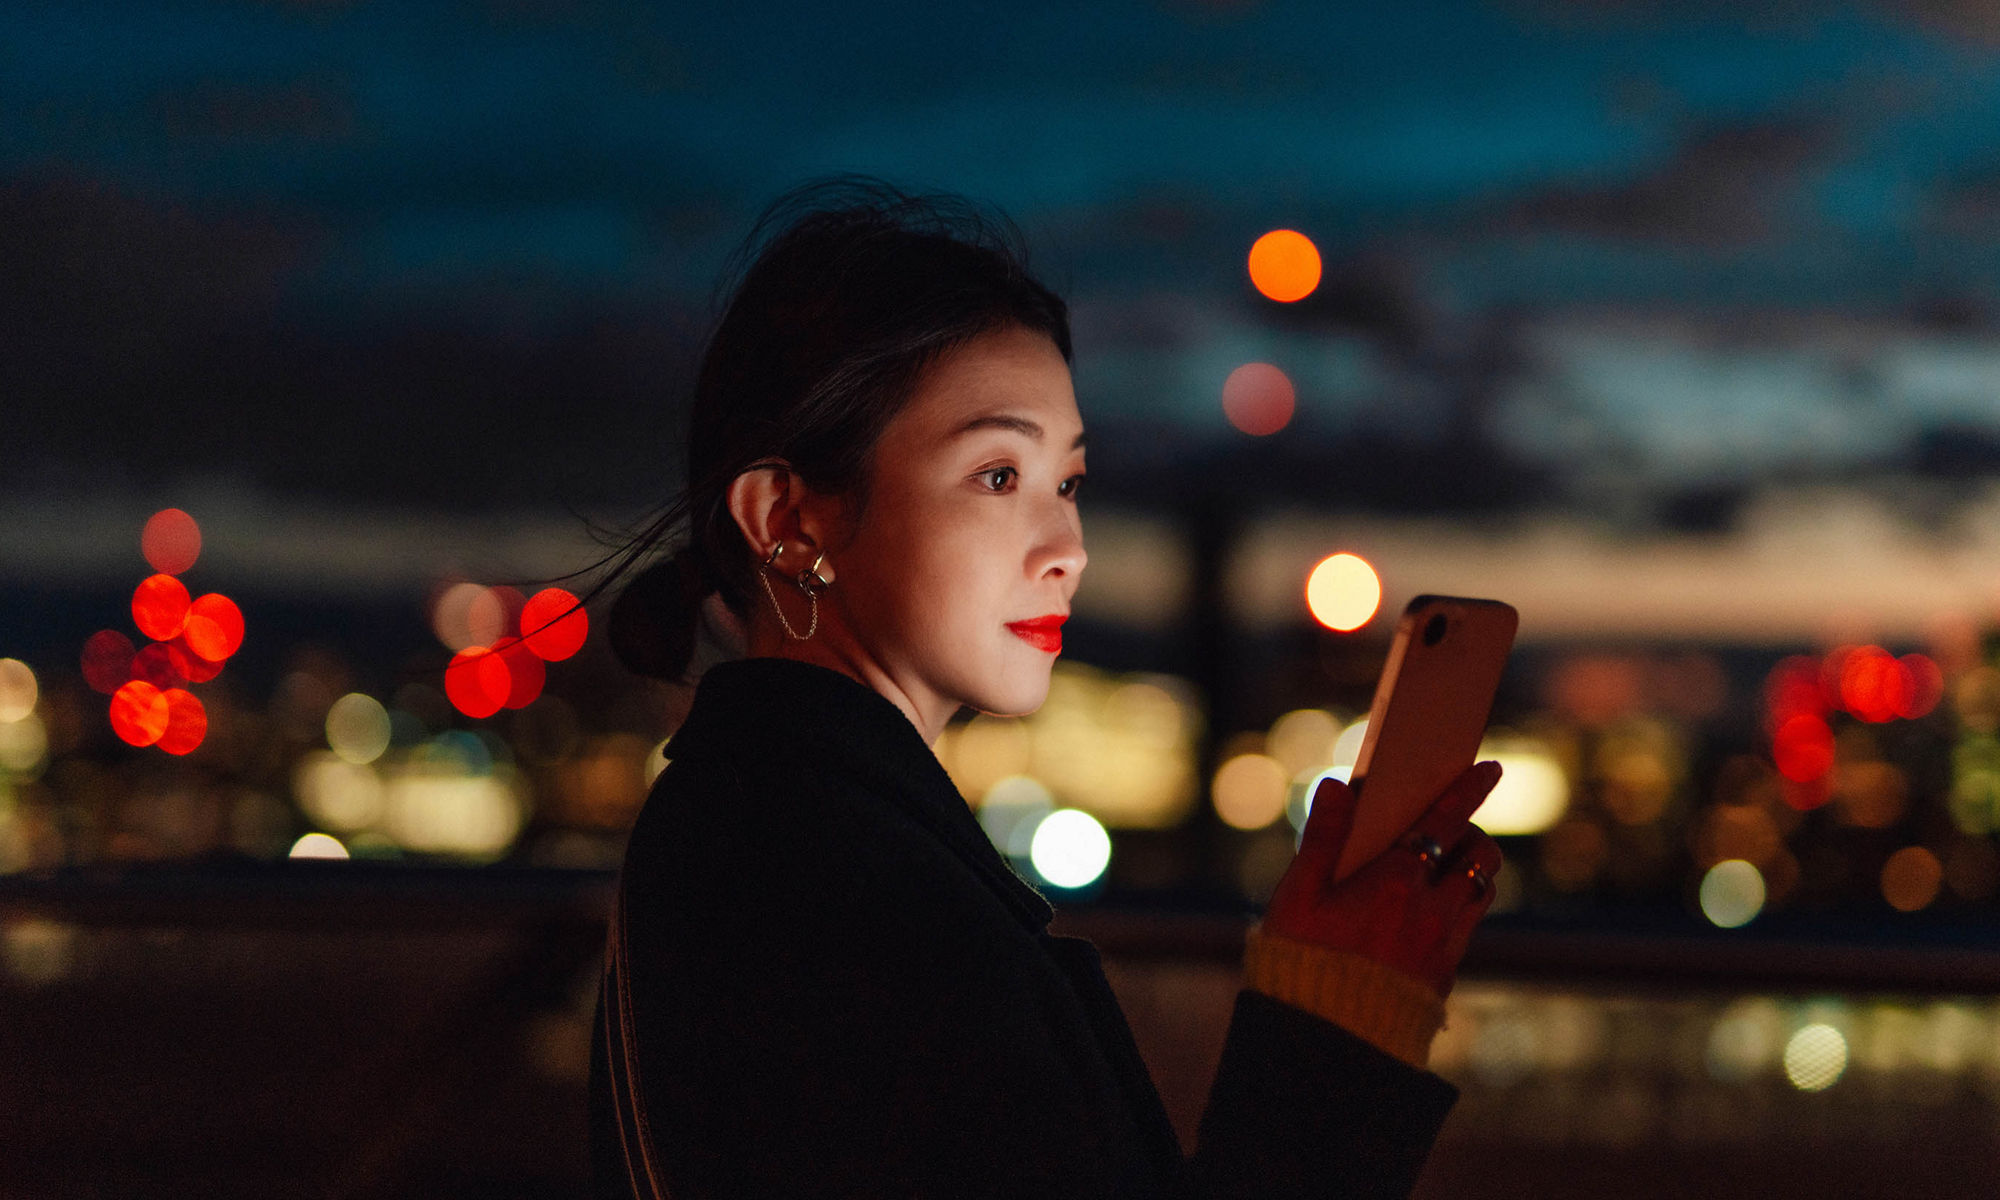 Woman looking at her phone, at night.